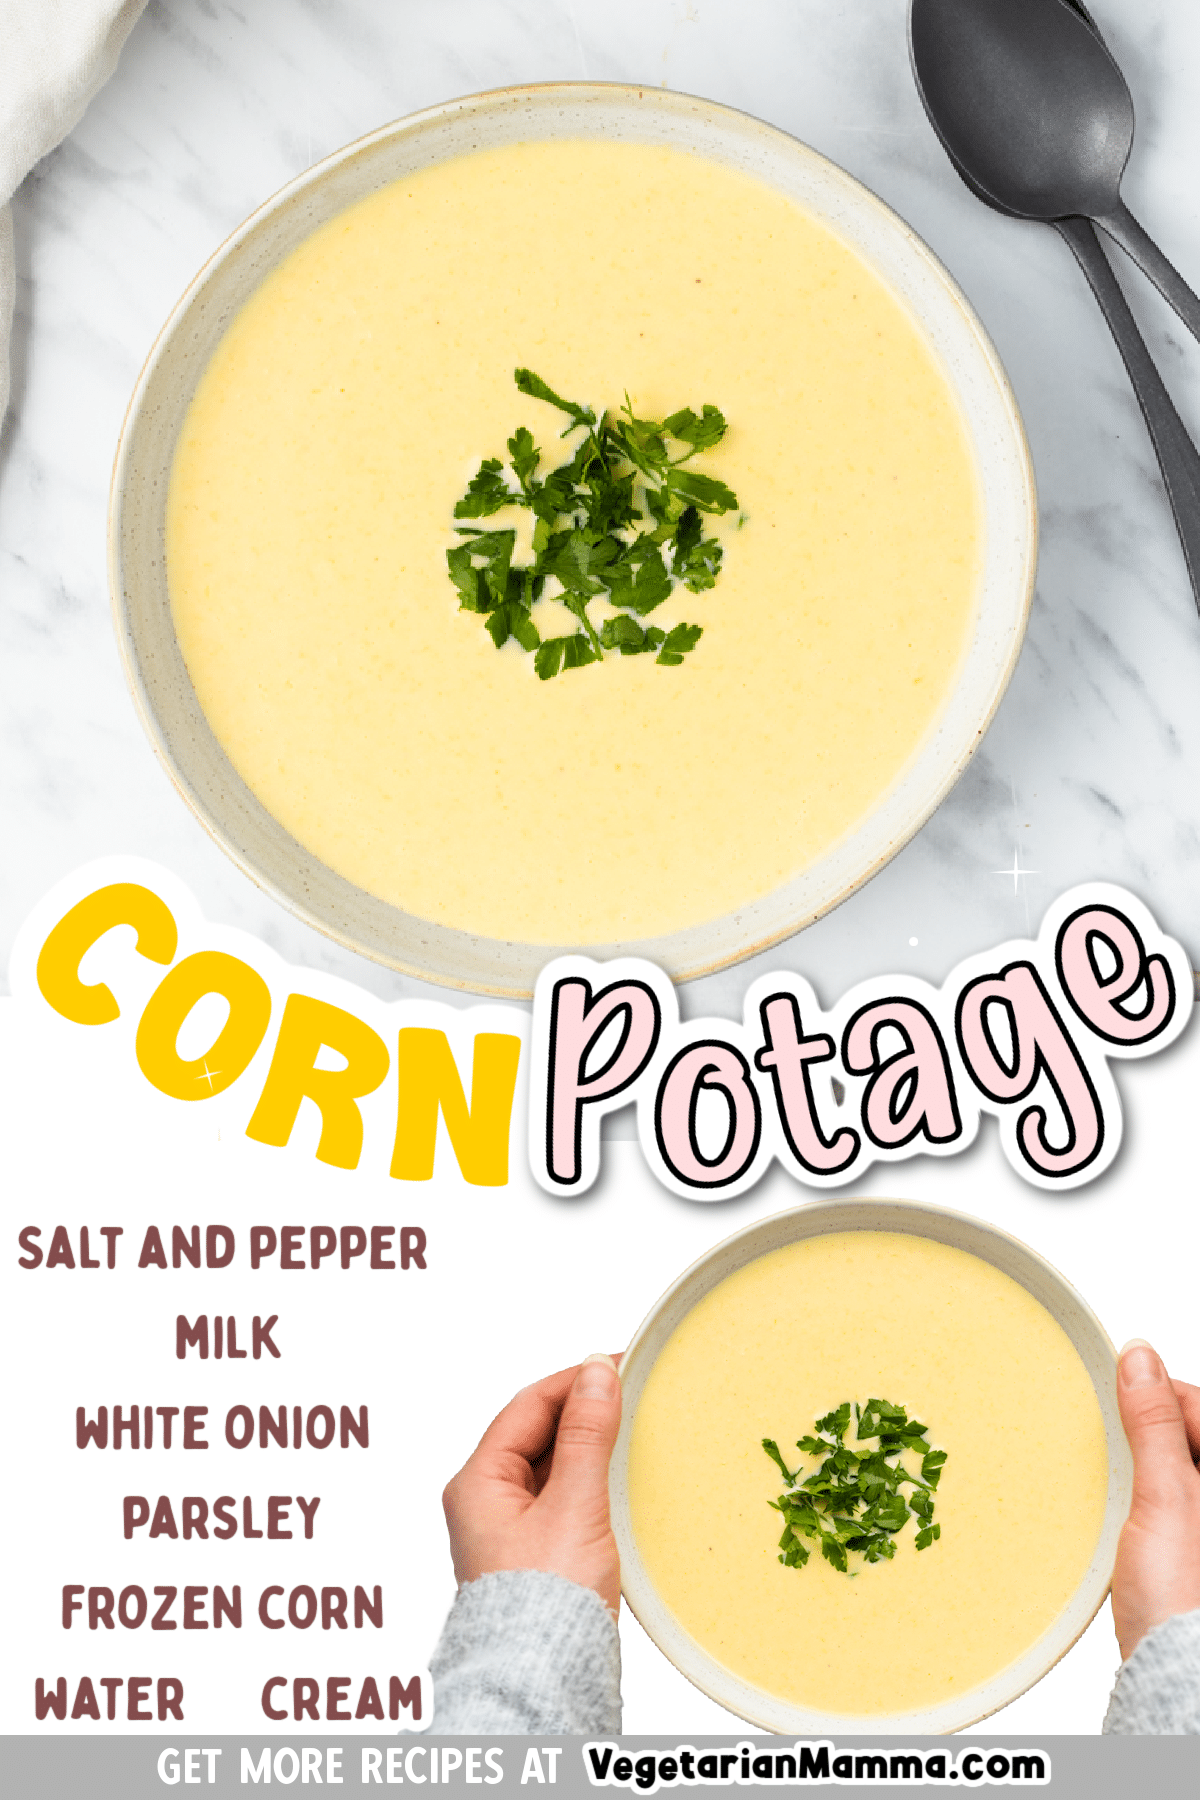 Corn Potage is a deliciously creamy corn soup, popular in Japan. You will love how easy it is to make this corn porridge using frozen corn and simple ingredients.